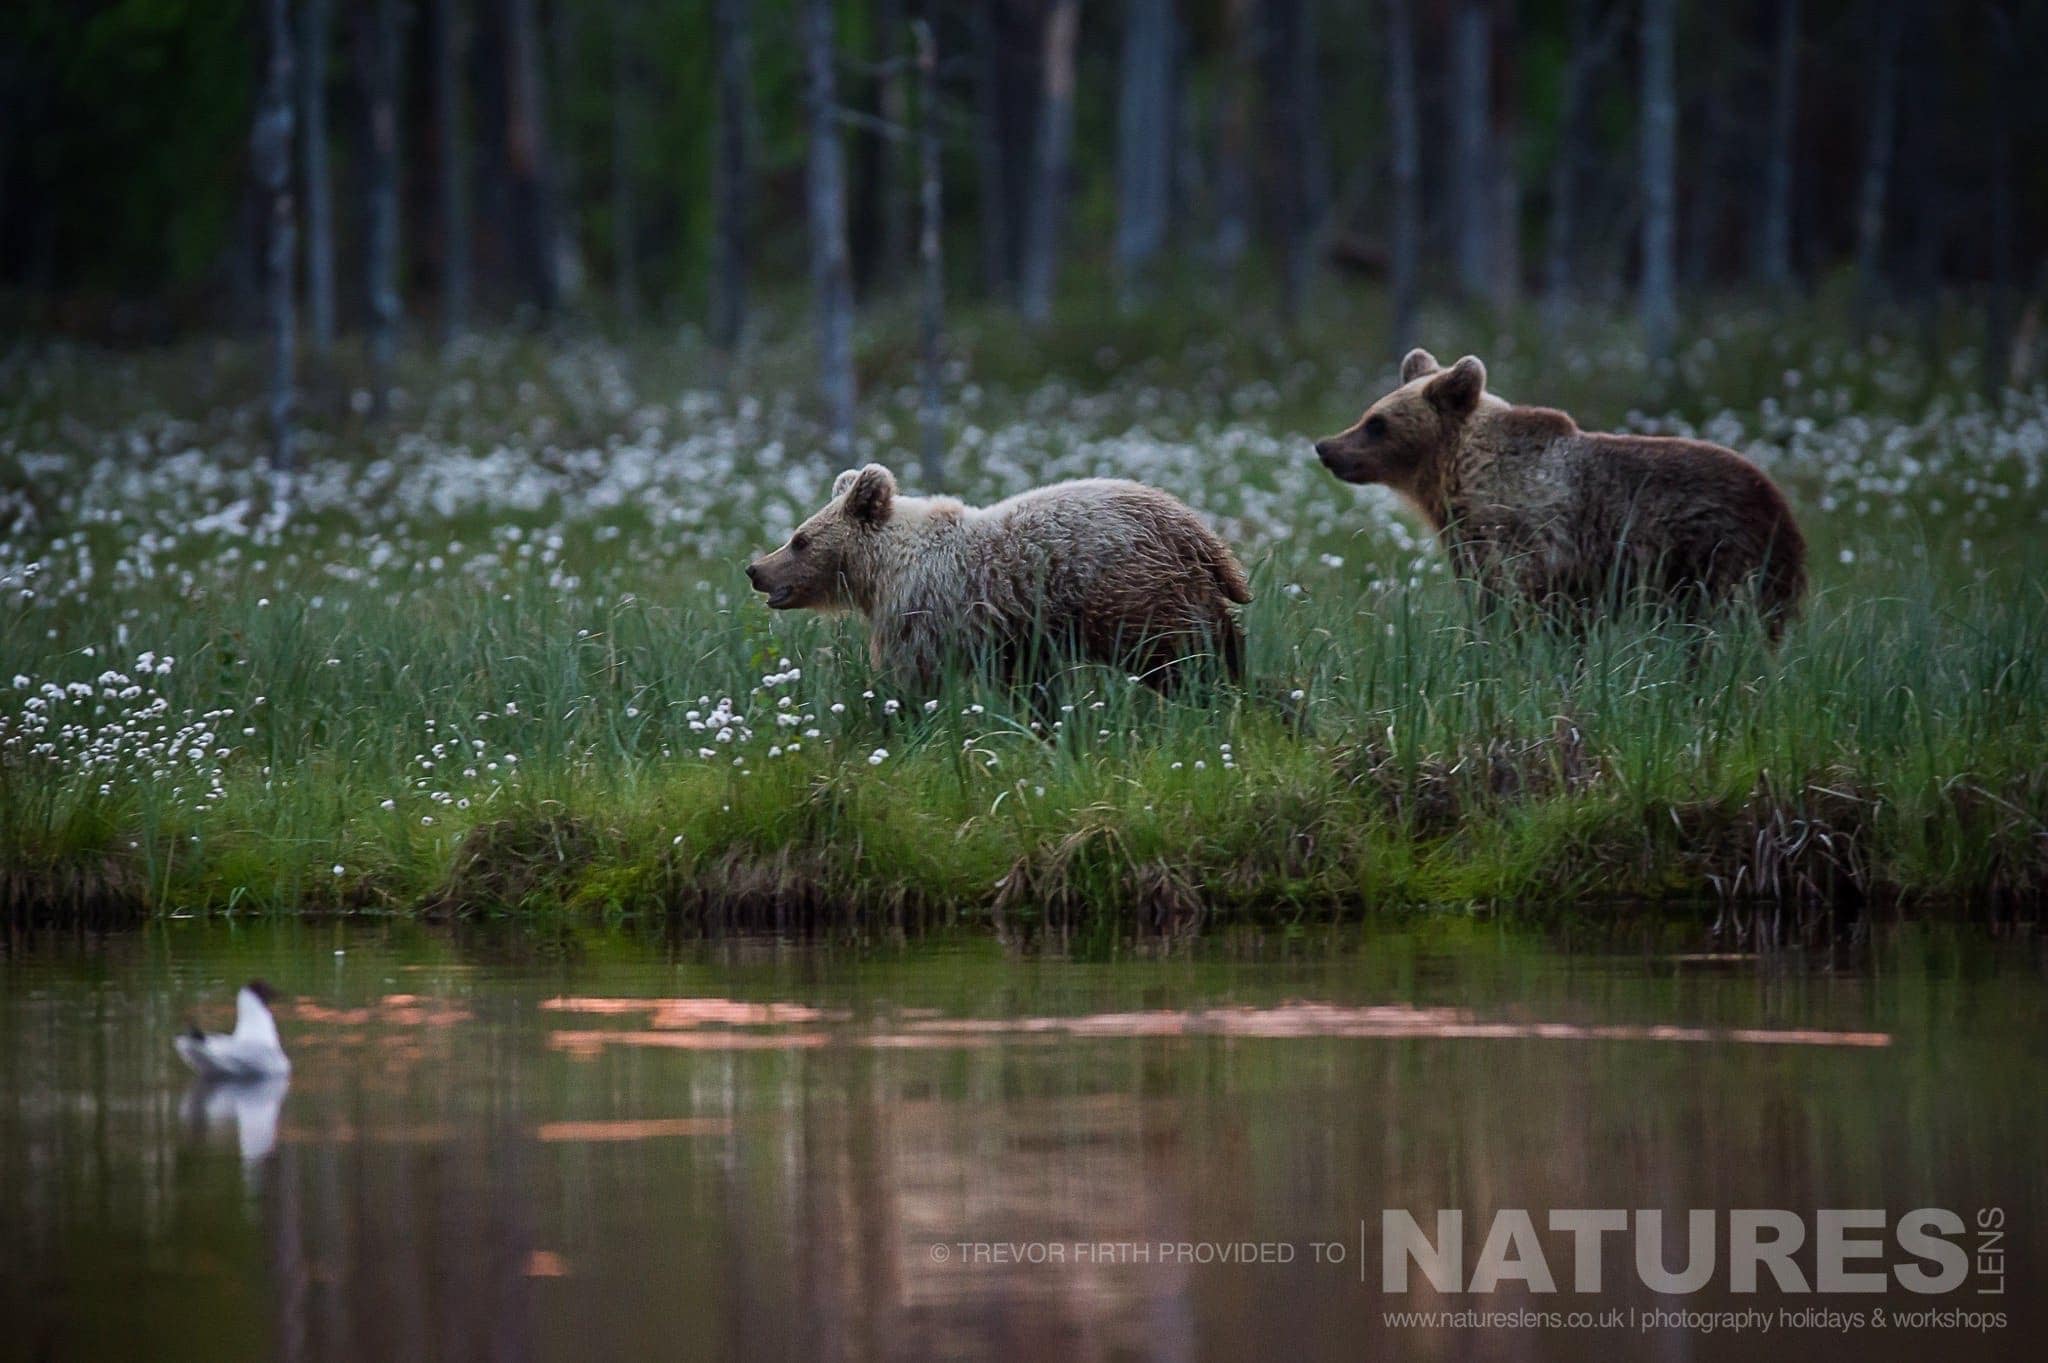 A pair of the Wild Brown Bears on the side of one of the lakes captured by NaturesLens guest Trevor during the Wild Brown Bears of Finland Photography Holiday